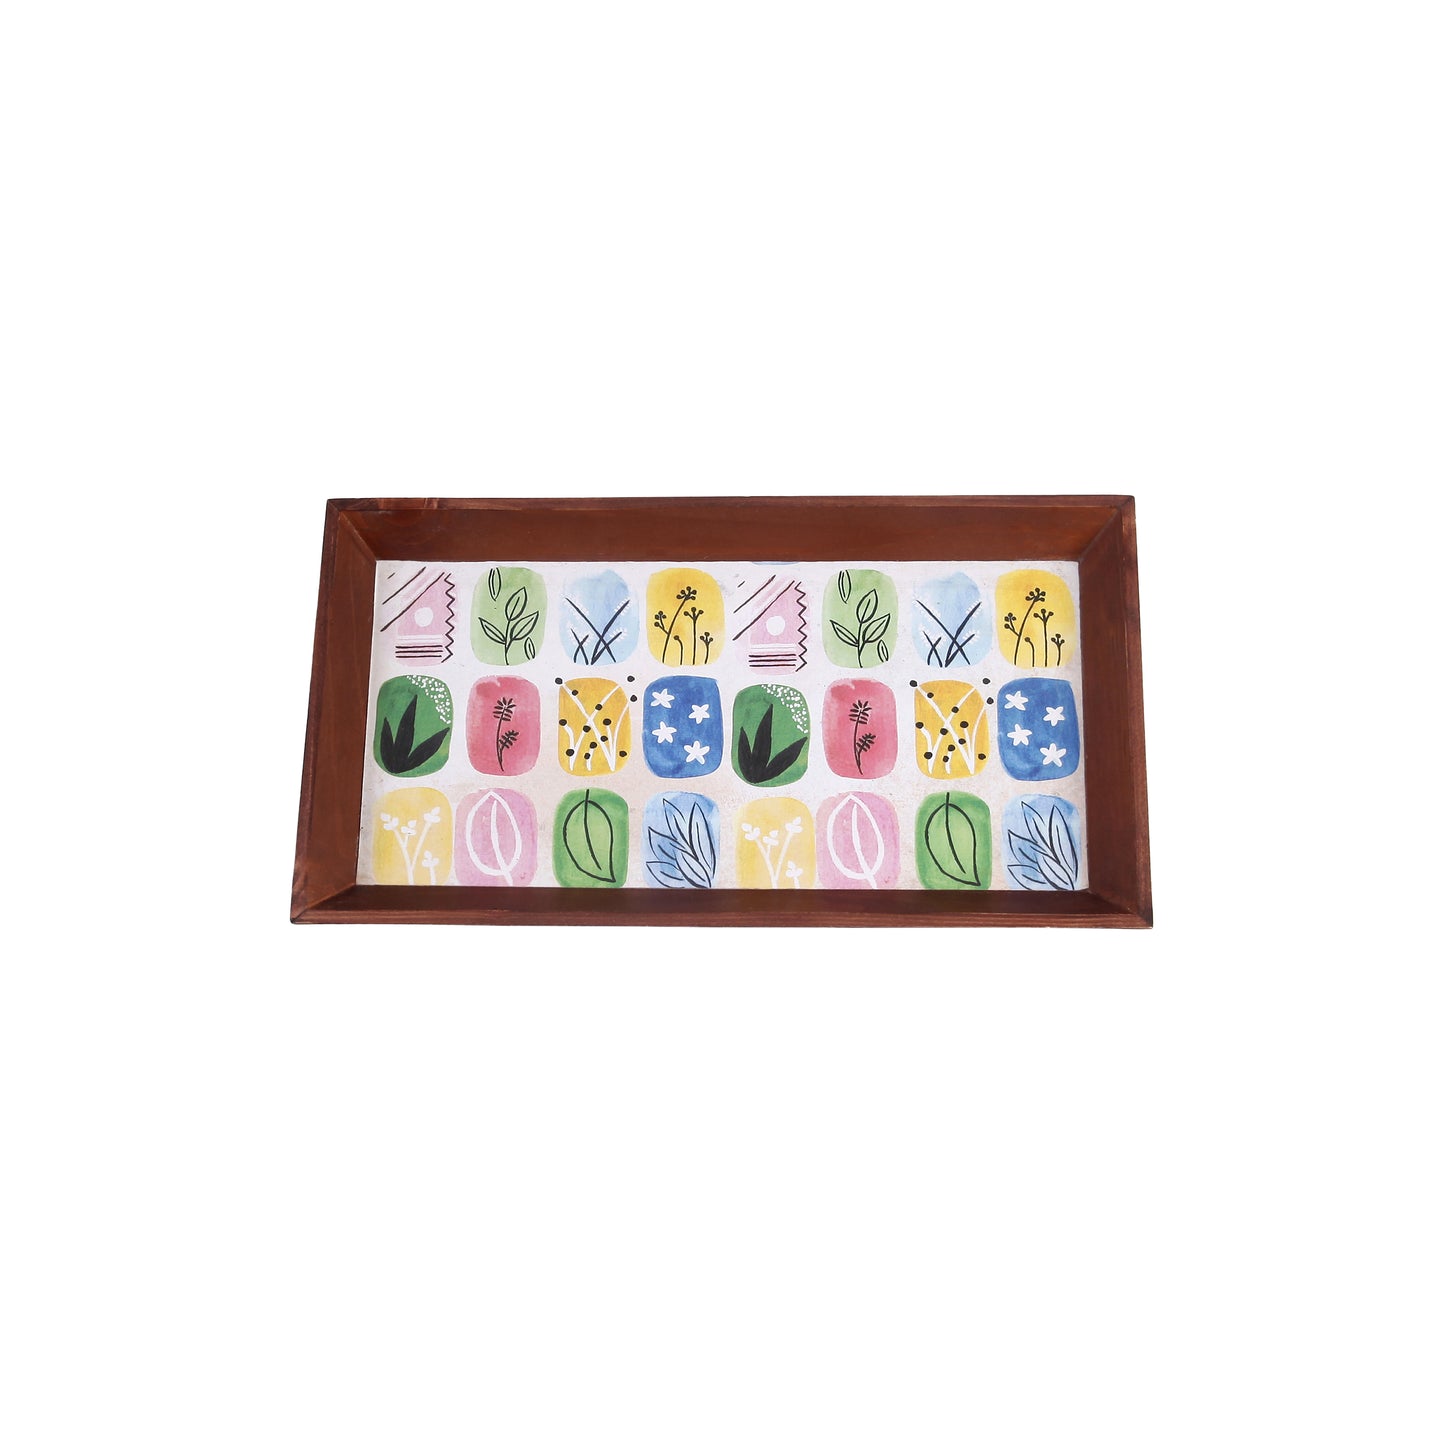 A Tiny Mistake Abstract Blocks Rectangle Wooden Serving Tray, 35 x 20 x 2 cm